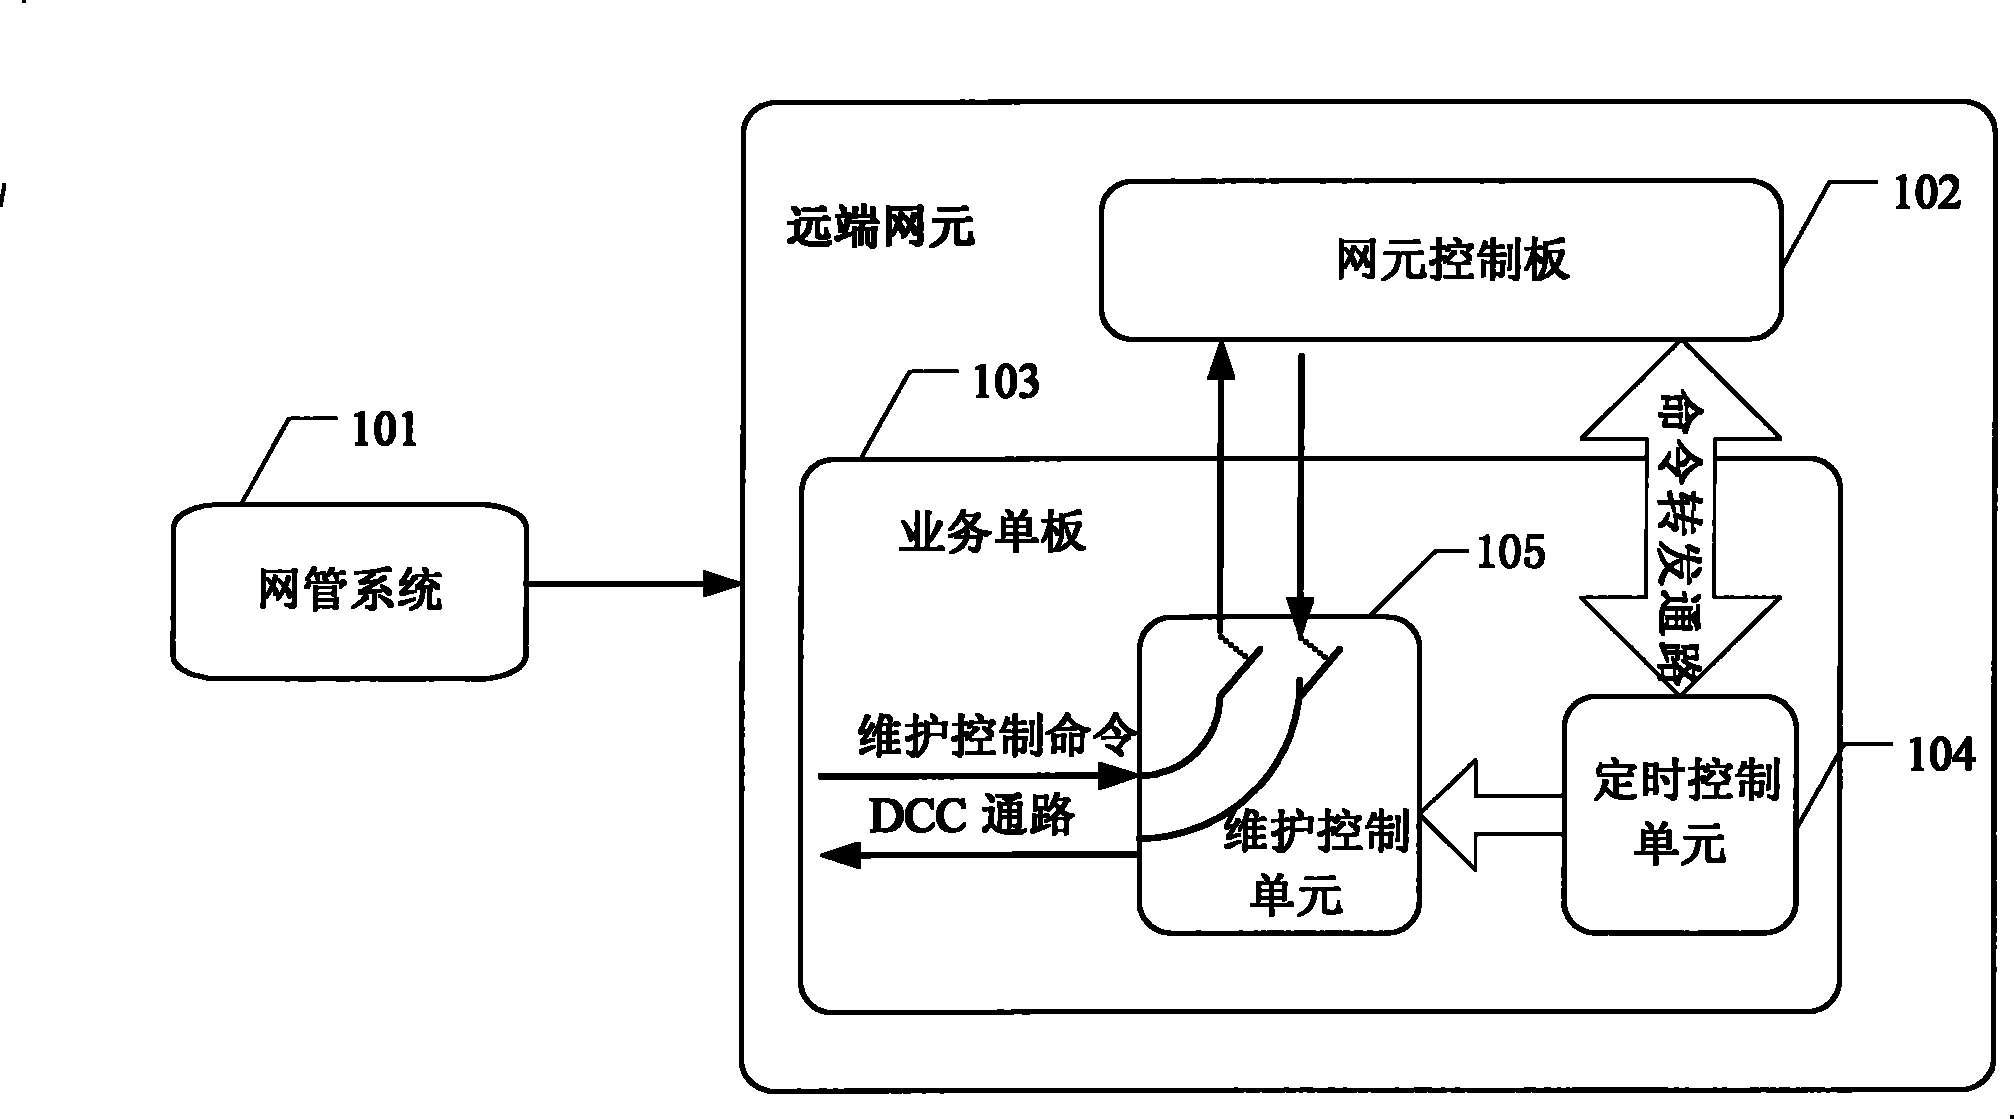 Method and system for automatically recovering maintenance and control of optical communication apparatus remotely